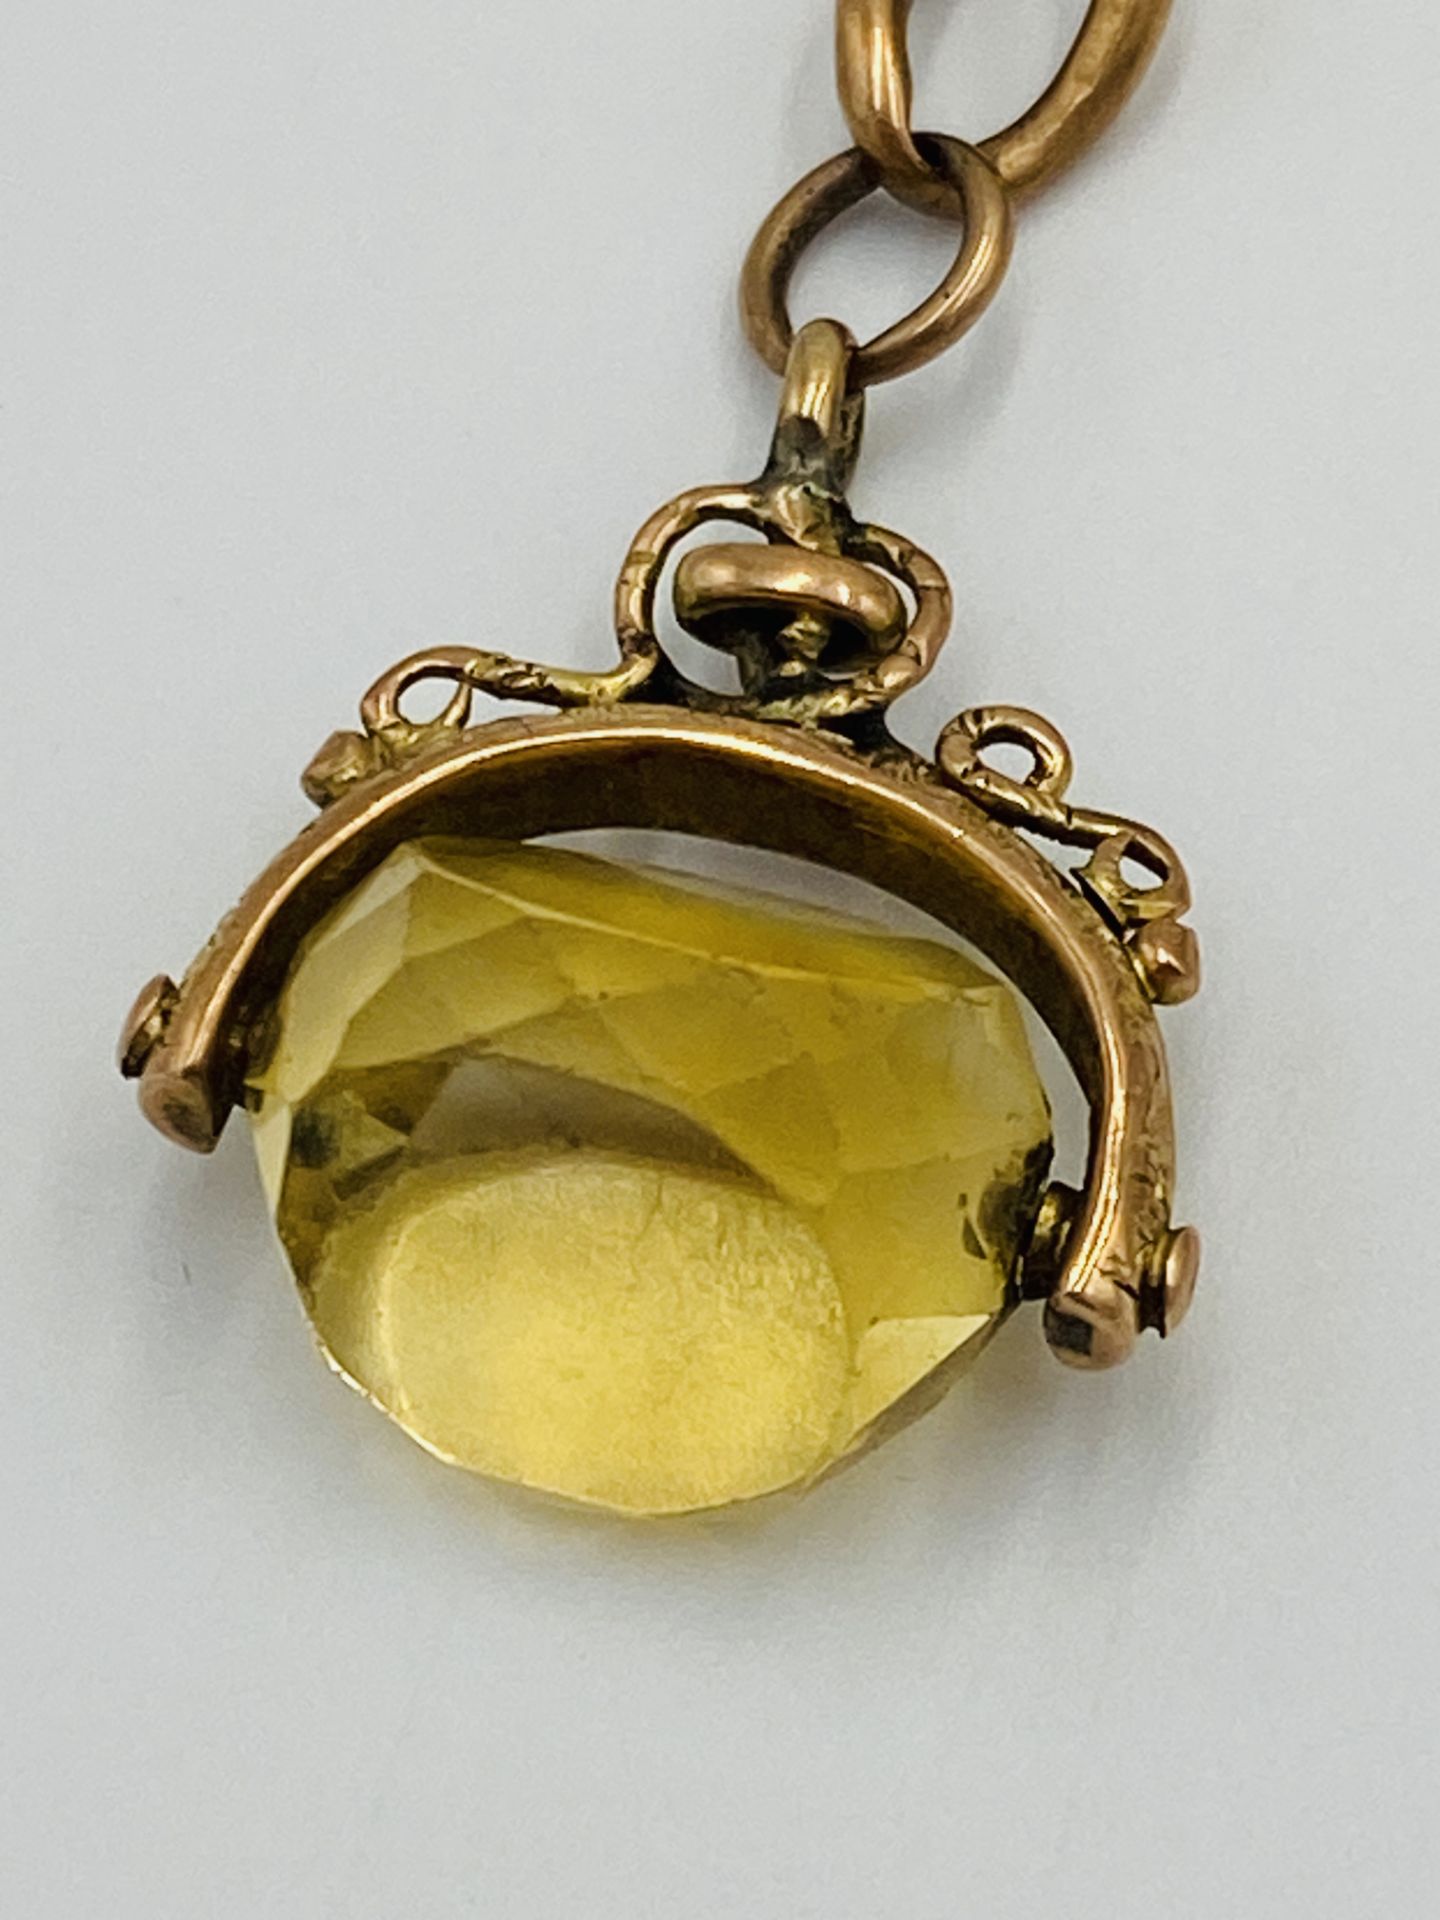 9ct gold fob chain with two fobs - Image 3 of 7